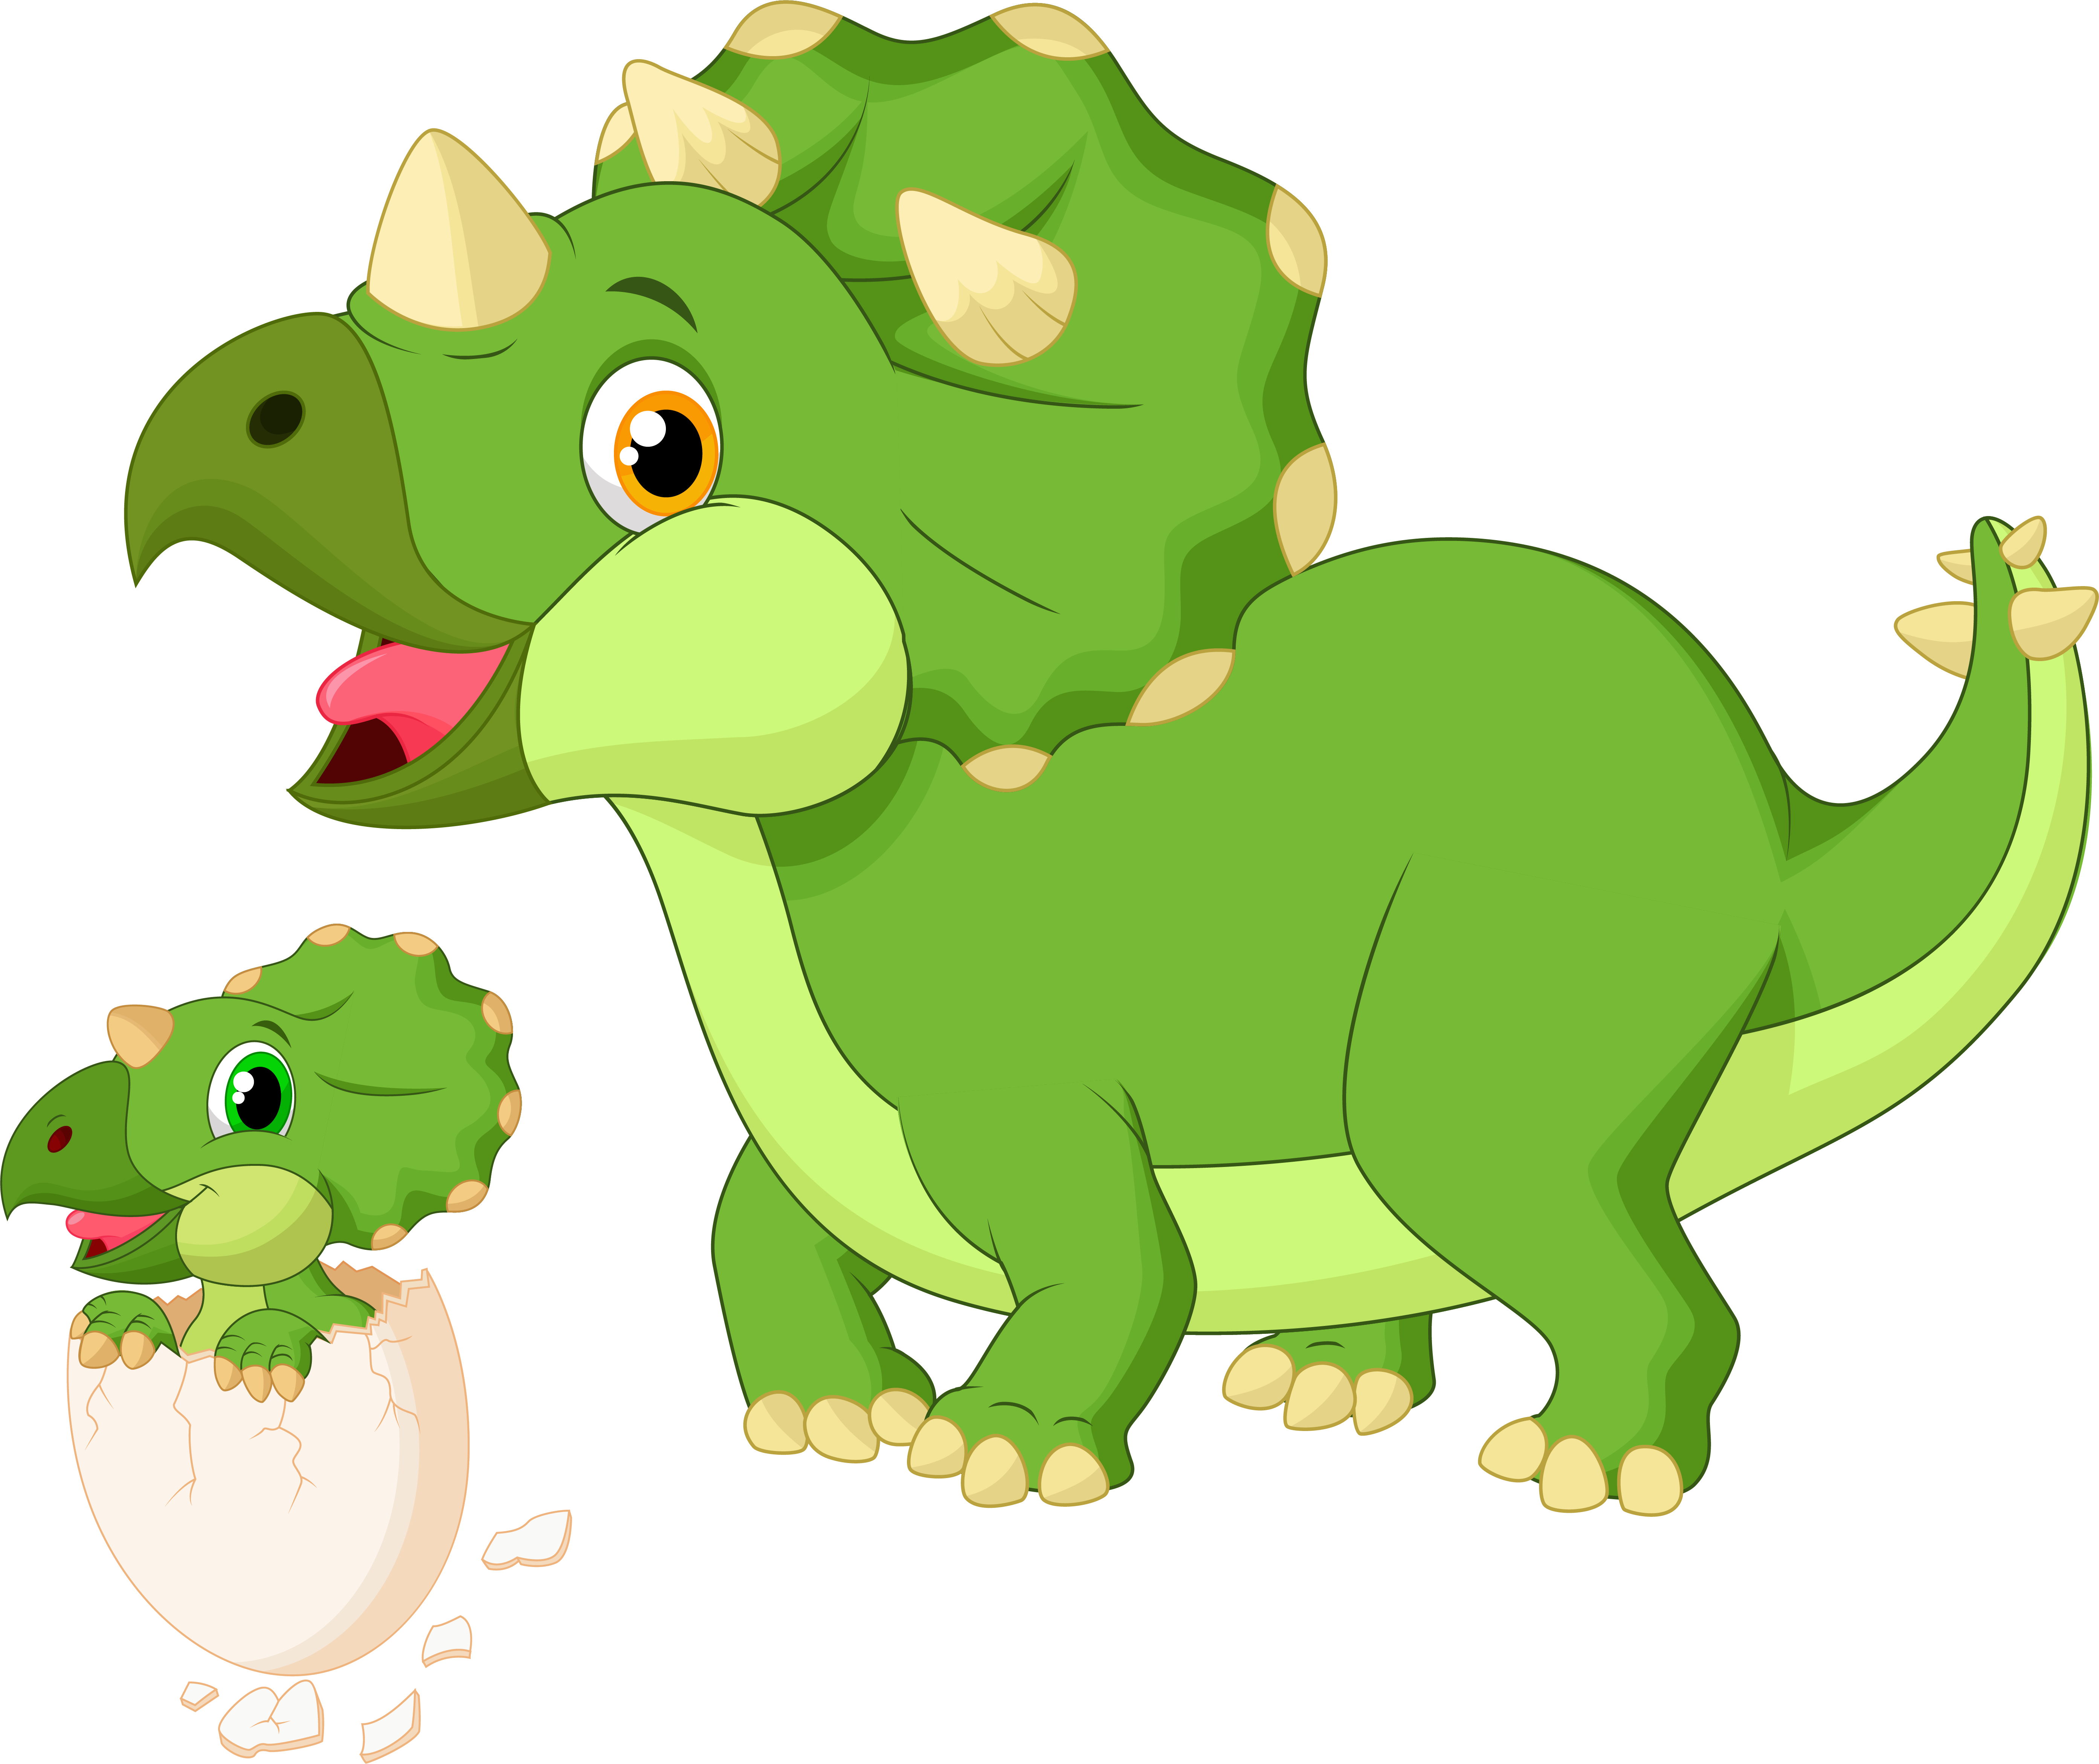 Baby Triceratops Clip art - dinosaur vector png download - 5573*4683